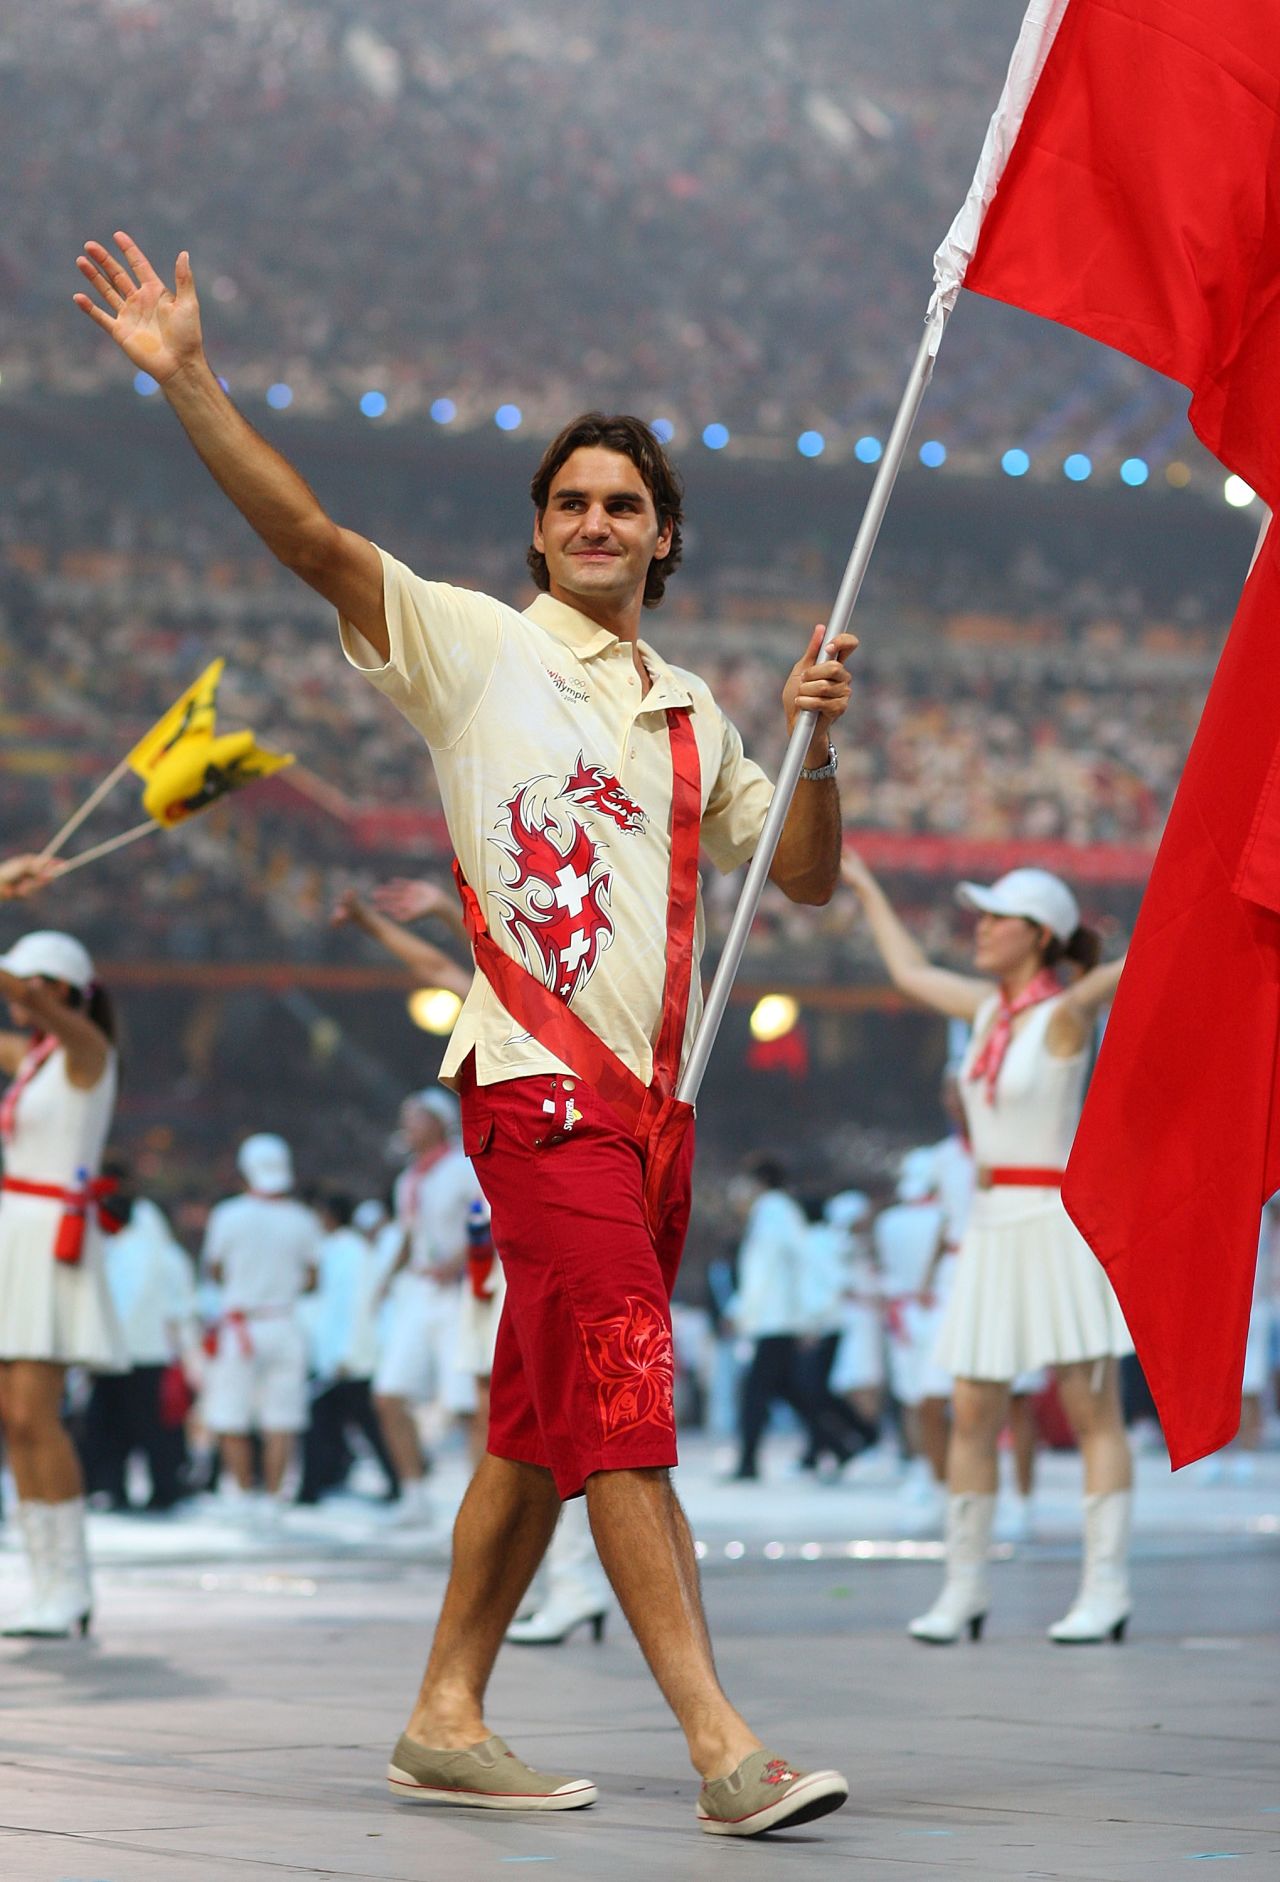 The tennis star was again chosen as flag bearer at Beijing 2008 despite failing to earn a medal in his two previous Olympic appearances.